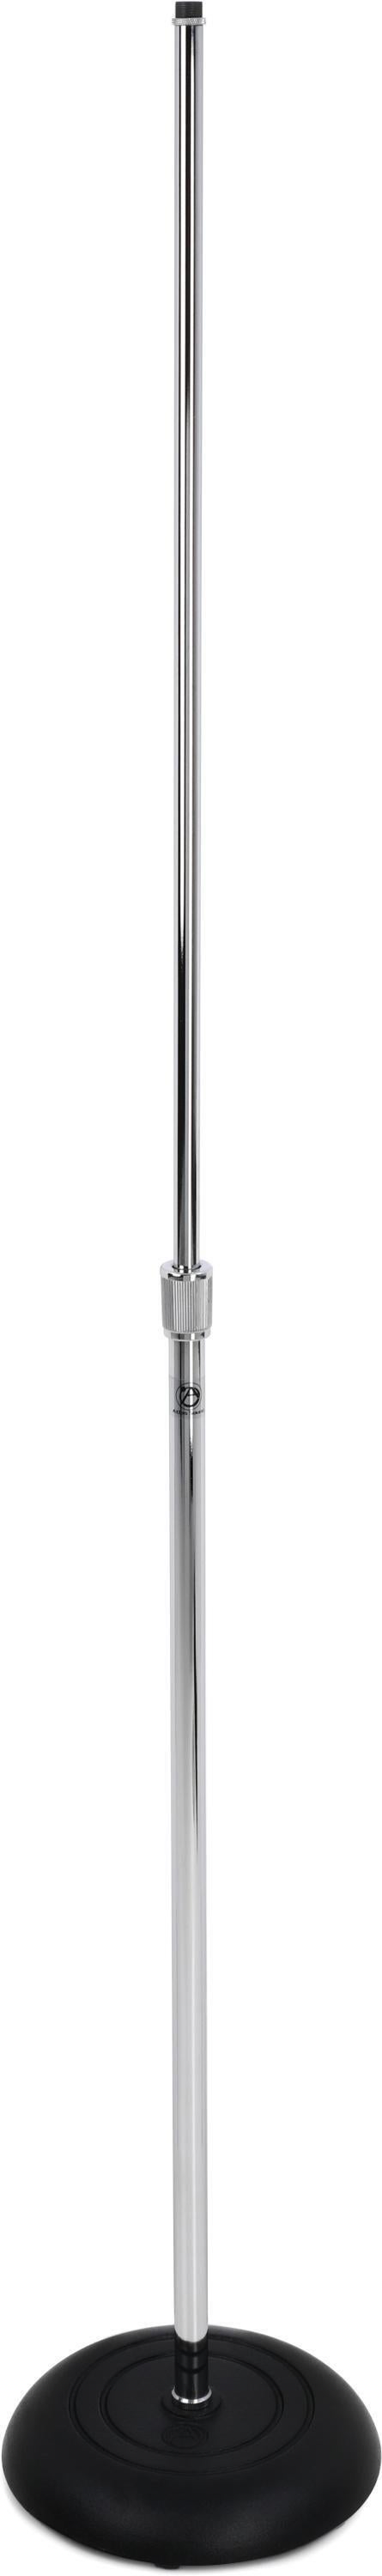 AtlasIED MS-10C Round Base Mic Stand - Chrome | Sweetwater